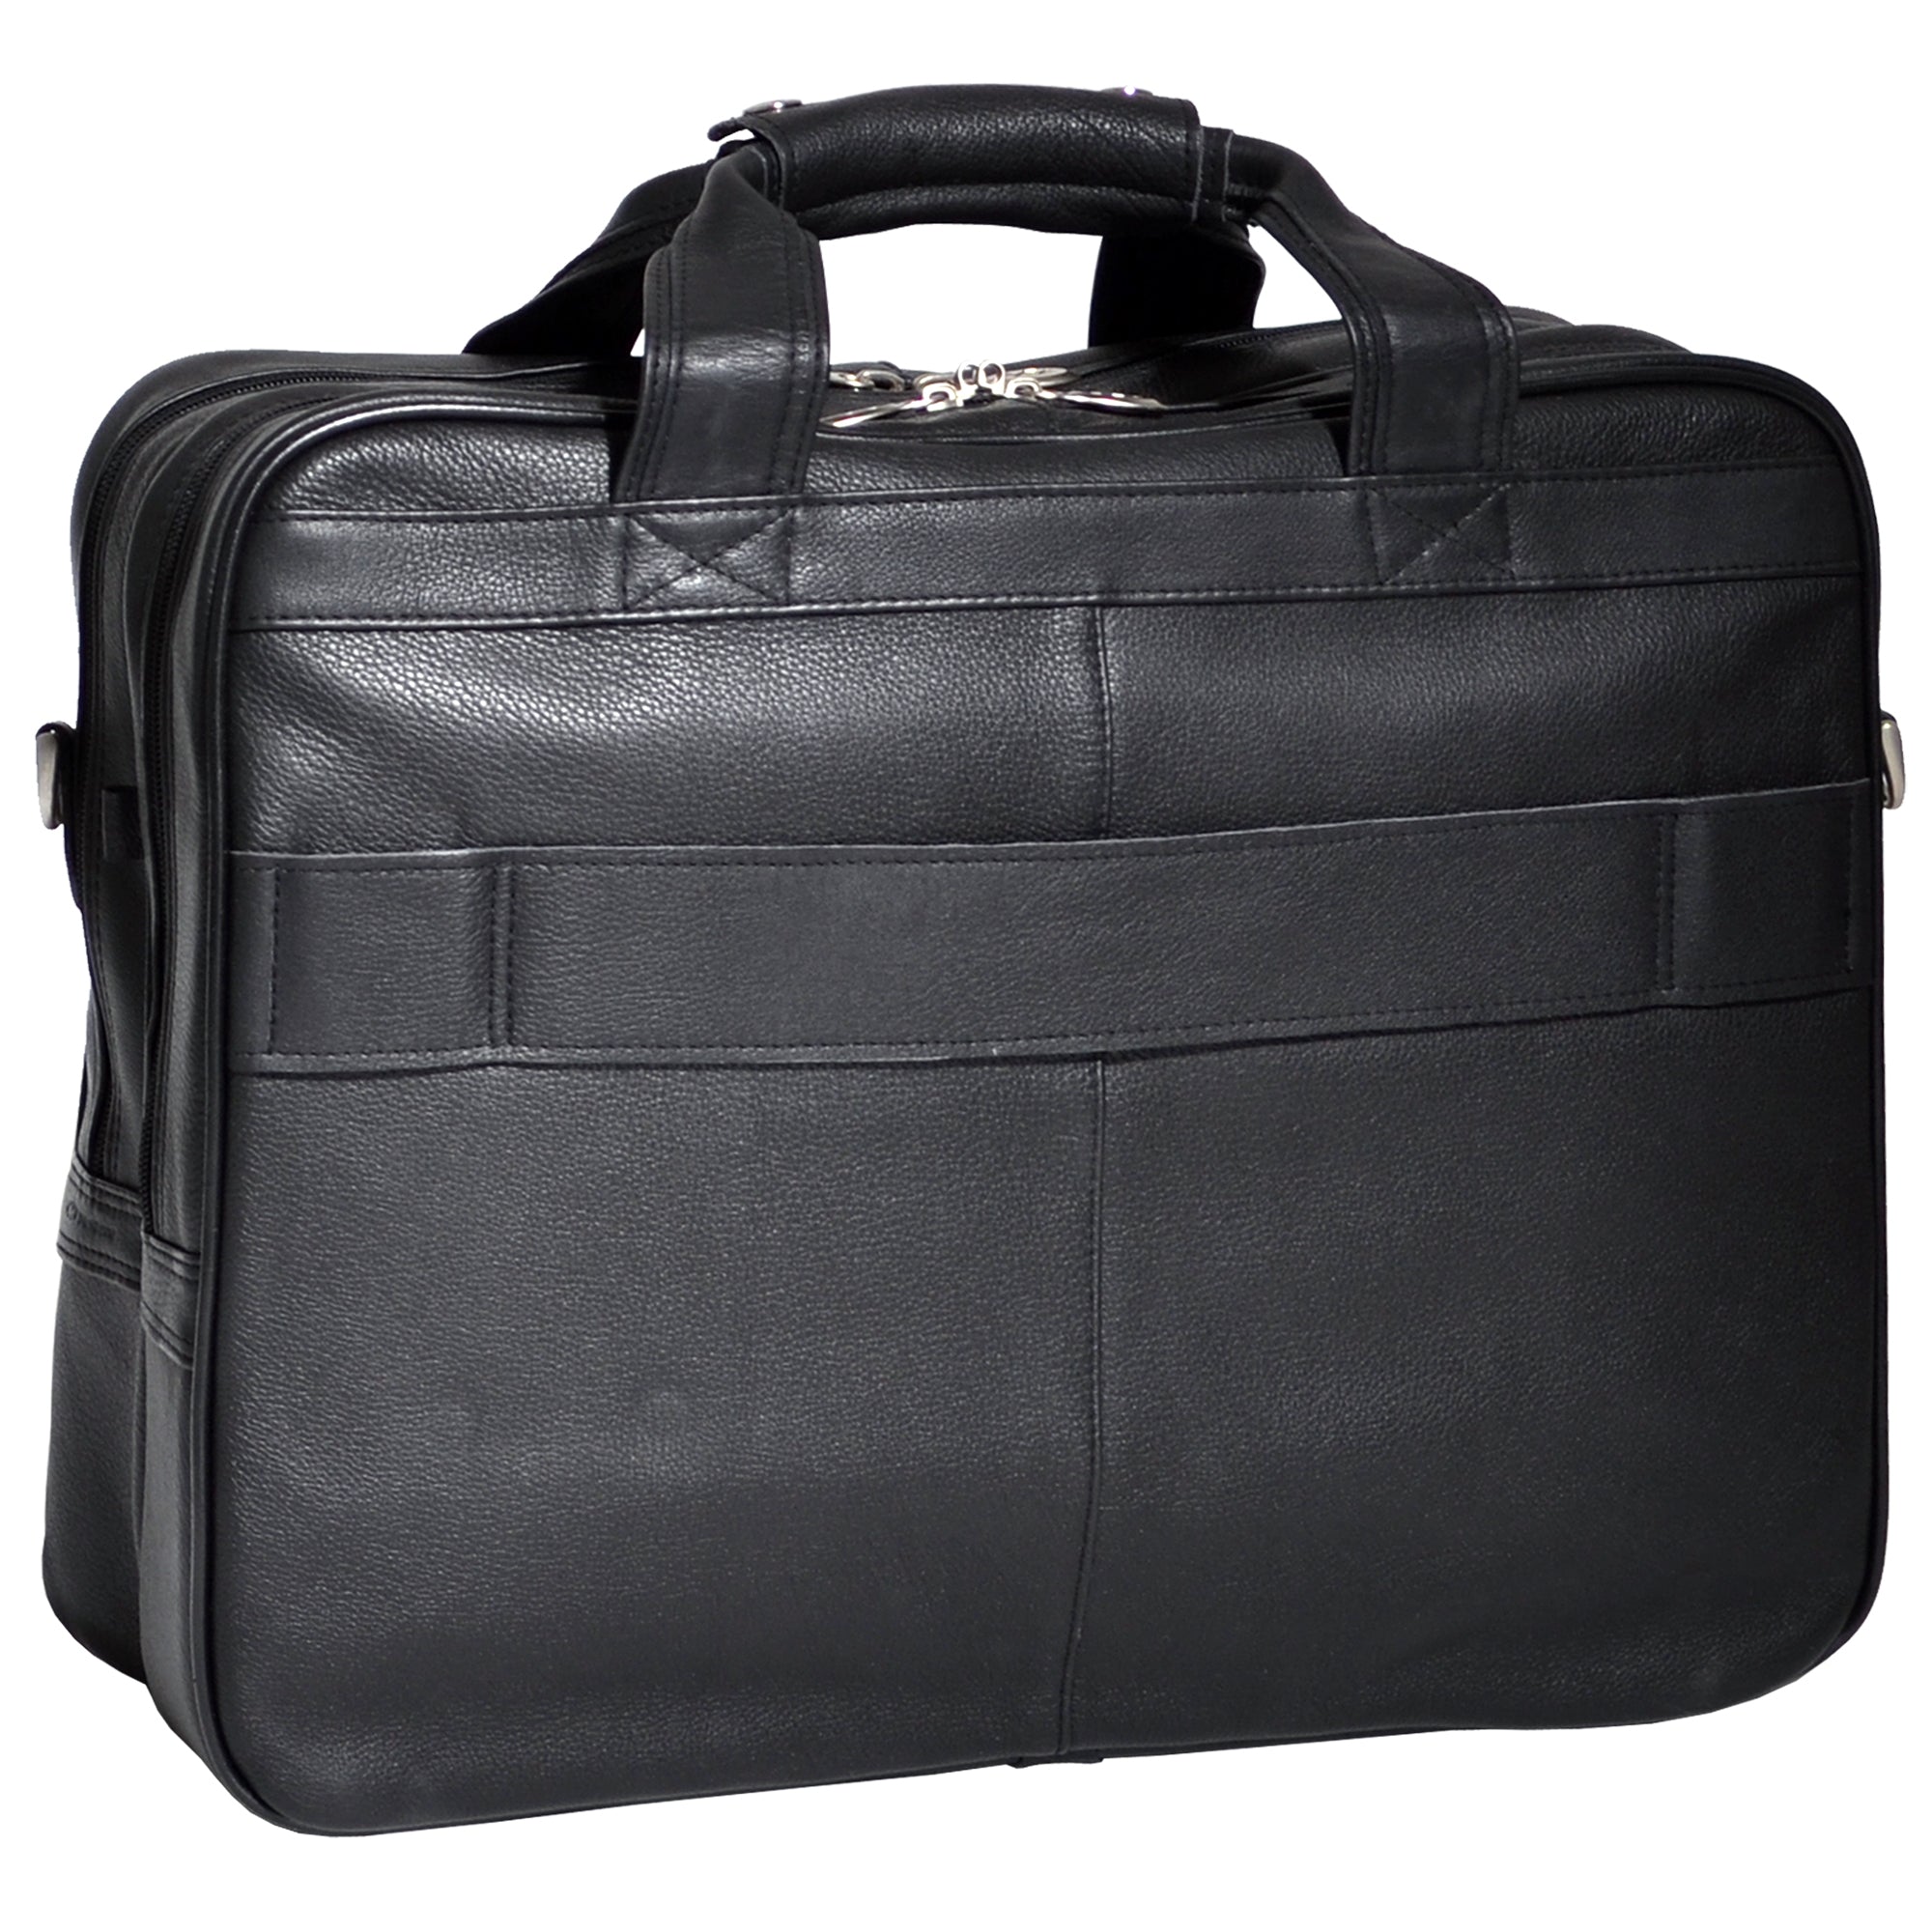 McKlein GOLD COAST 17" Leather Patented Detachable -Wheeled Laptop Briefcase